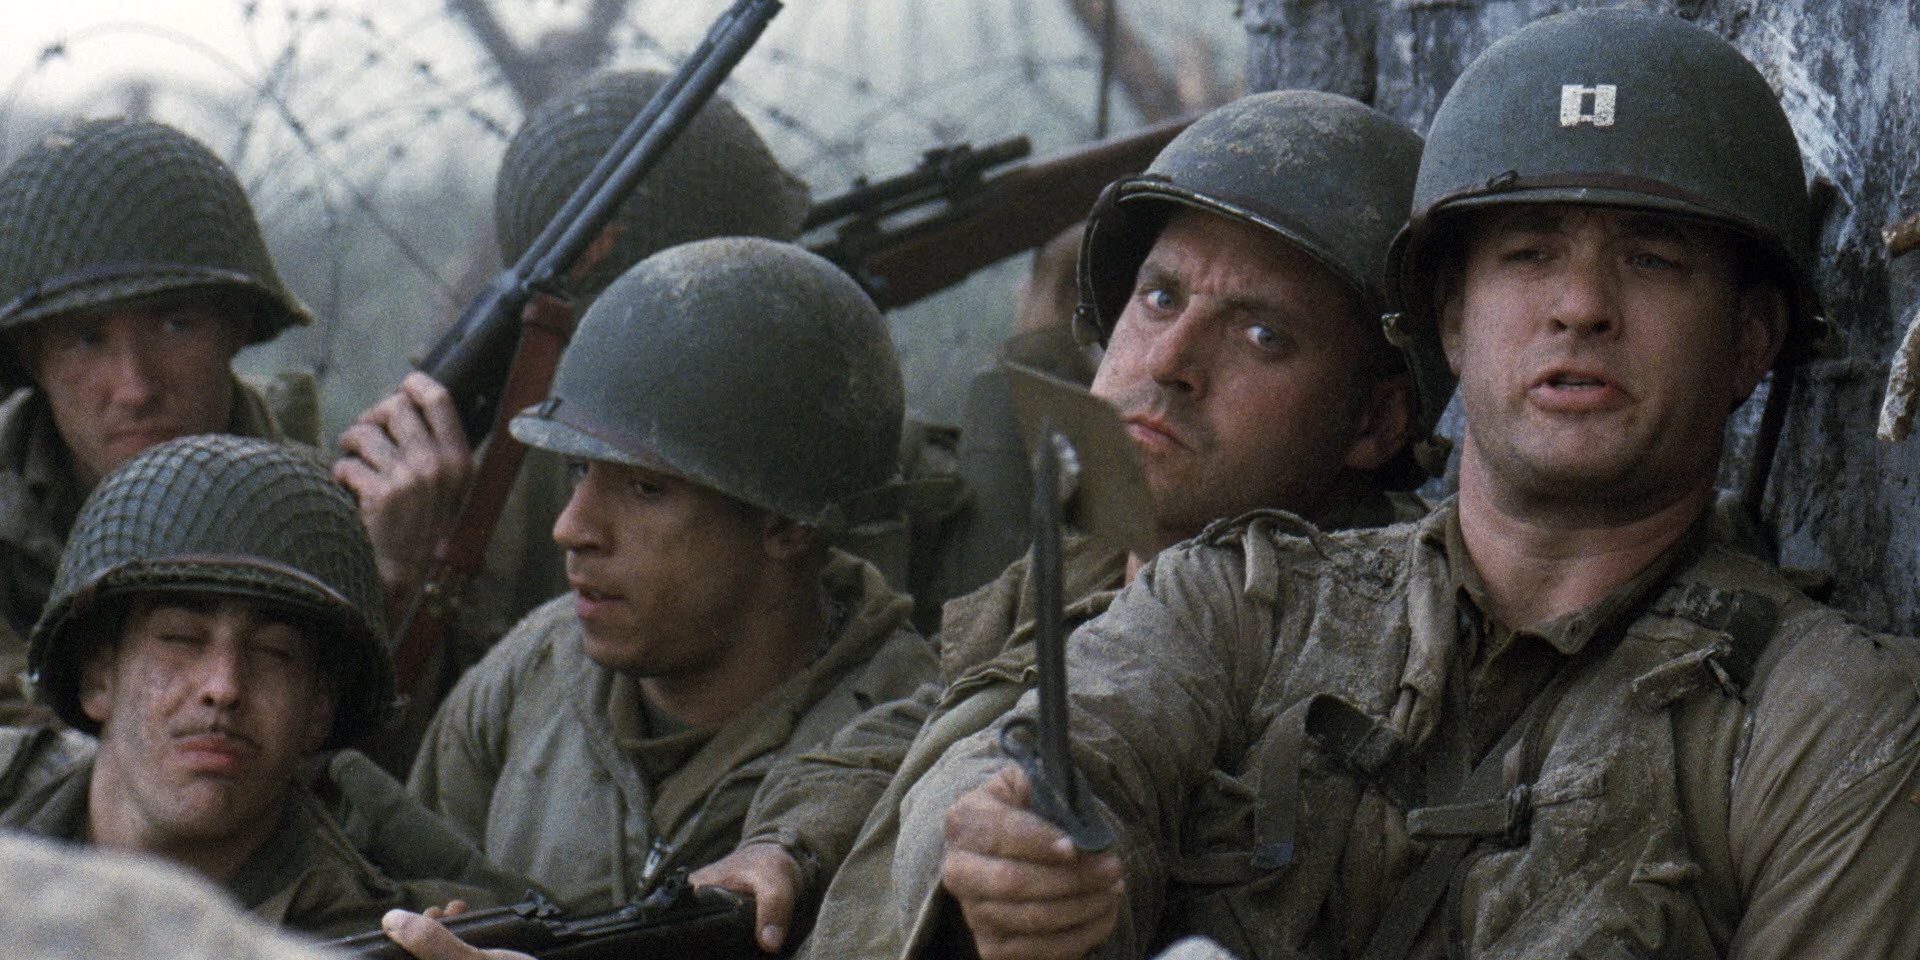 The opening D Day scene in Saving Private Ryan